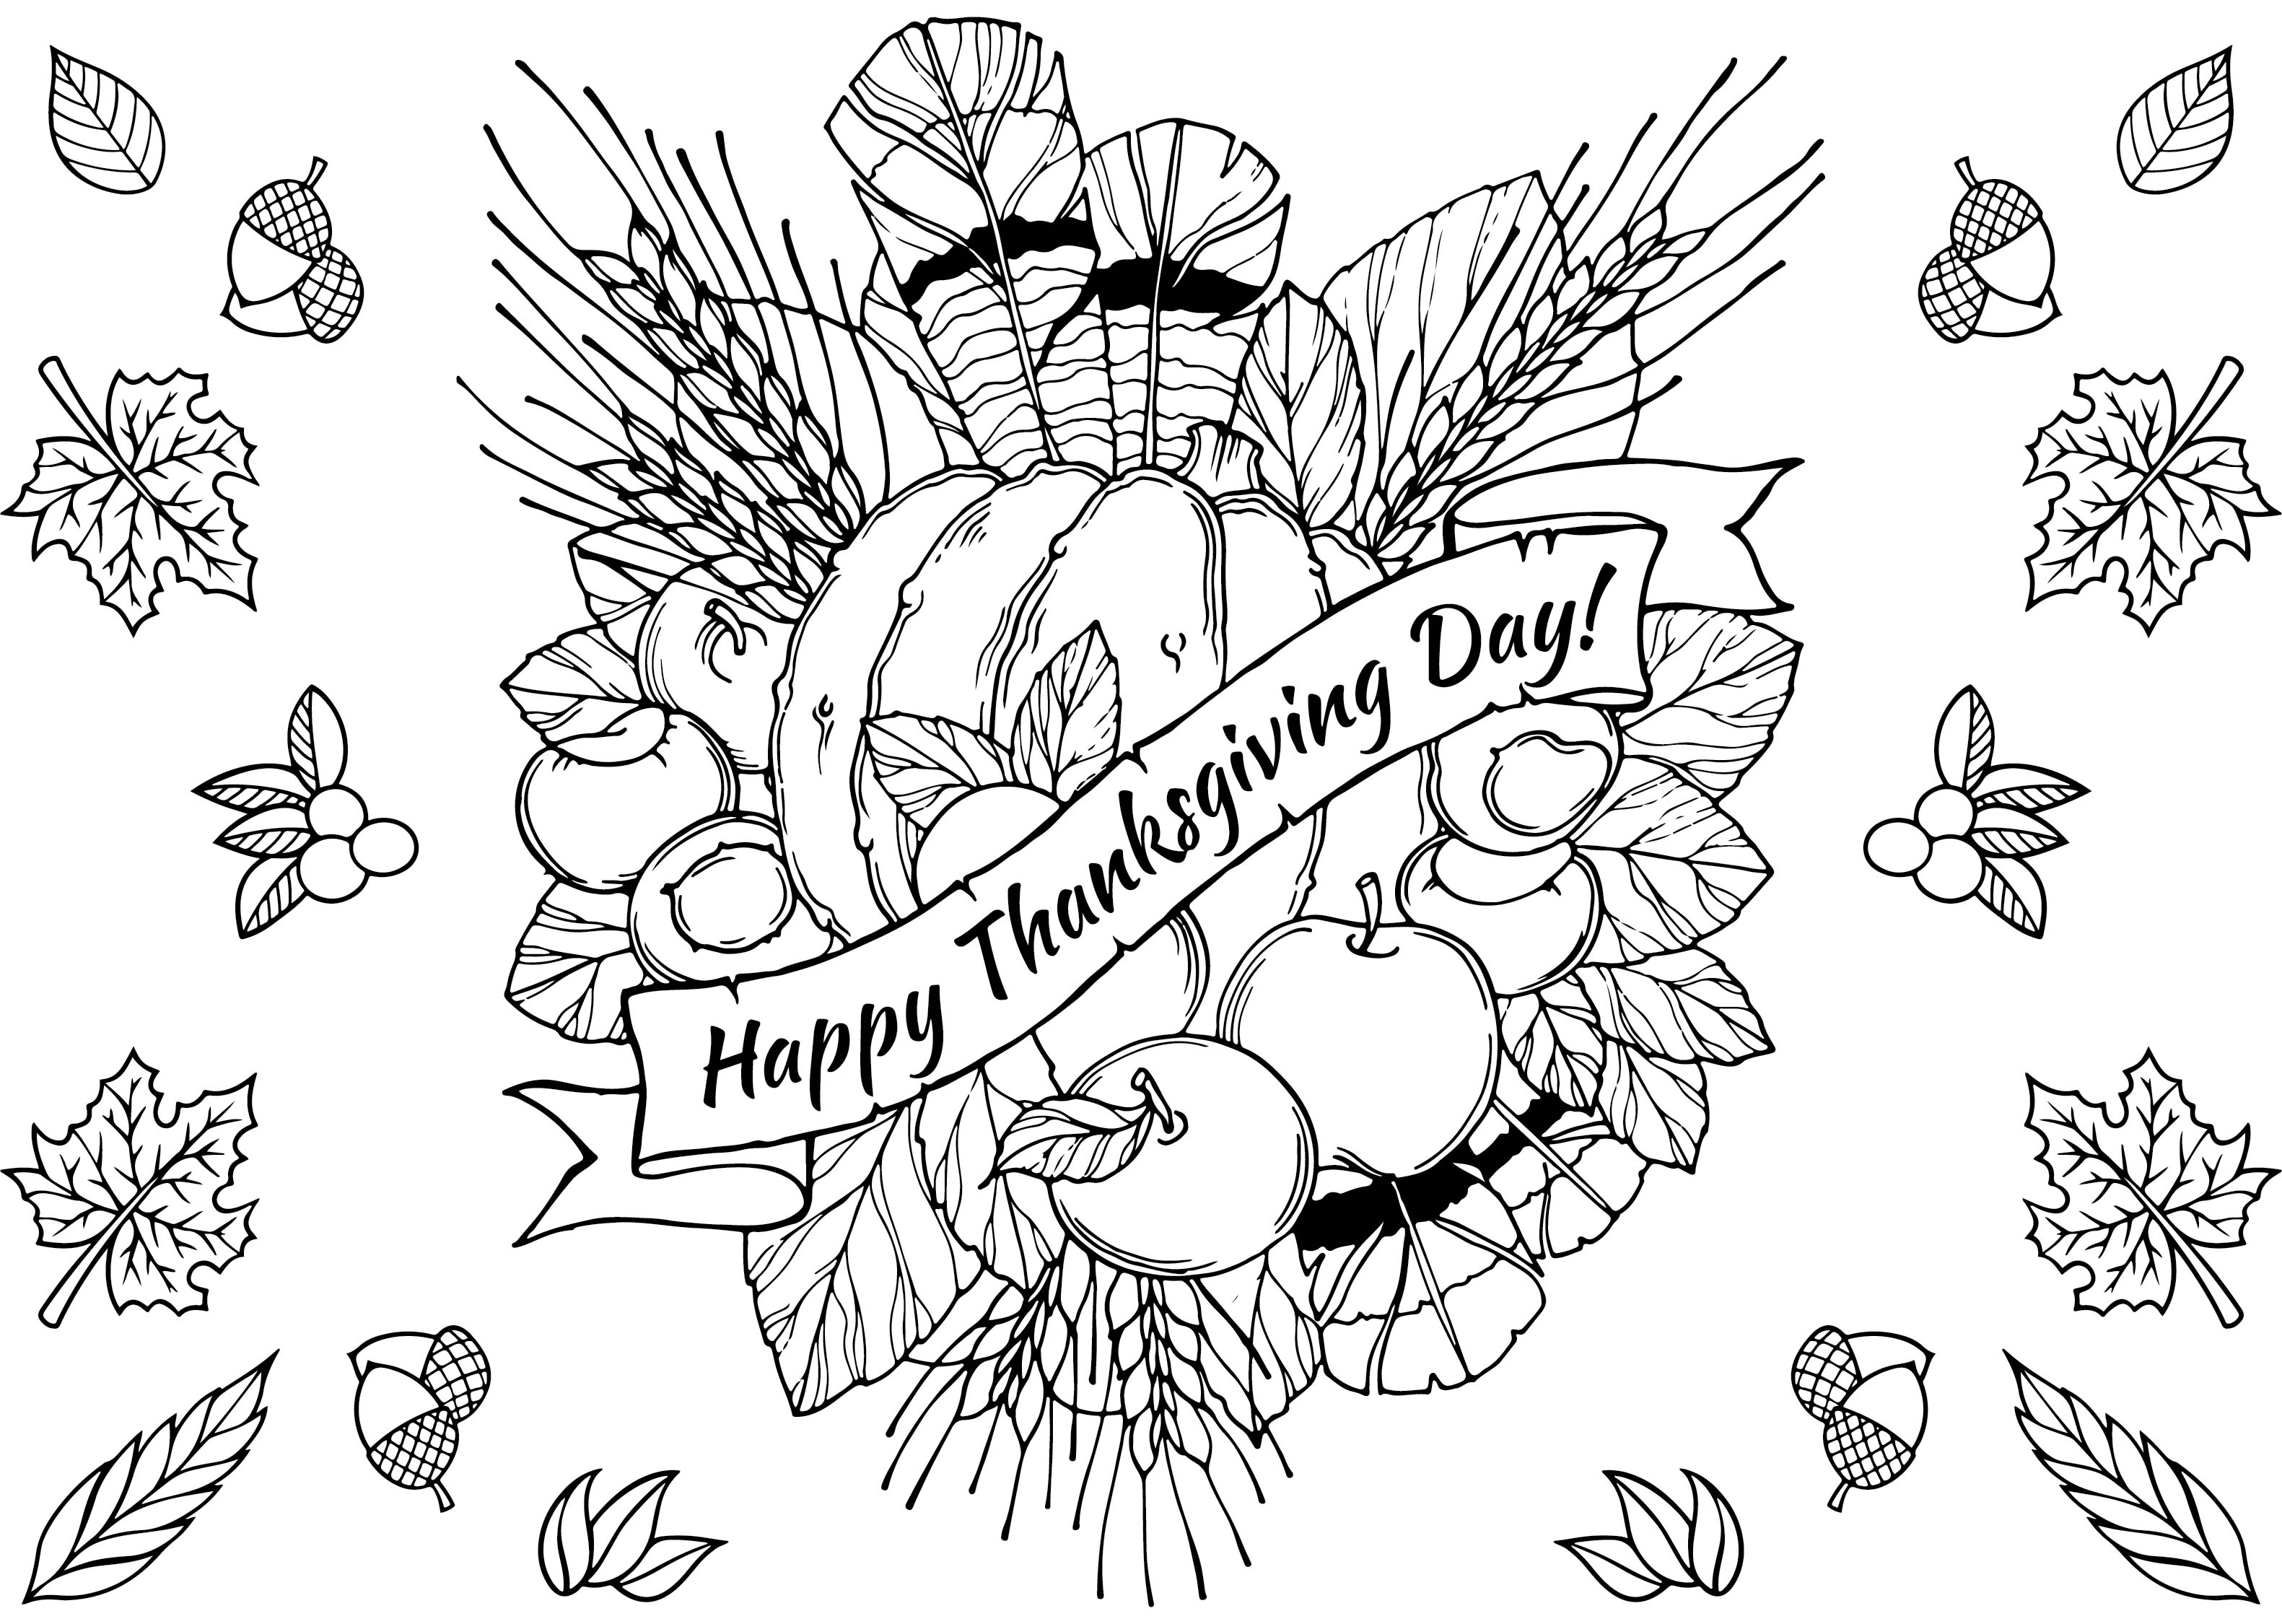 Printable Thanksgiving Coloring Placemats